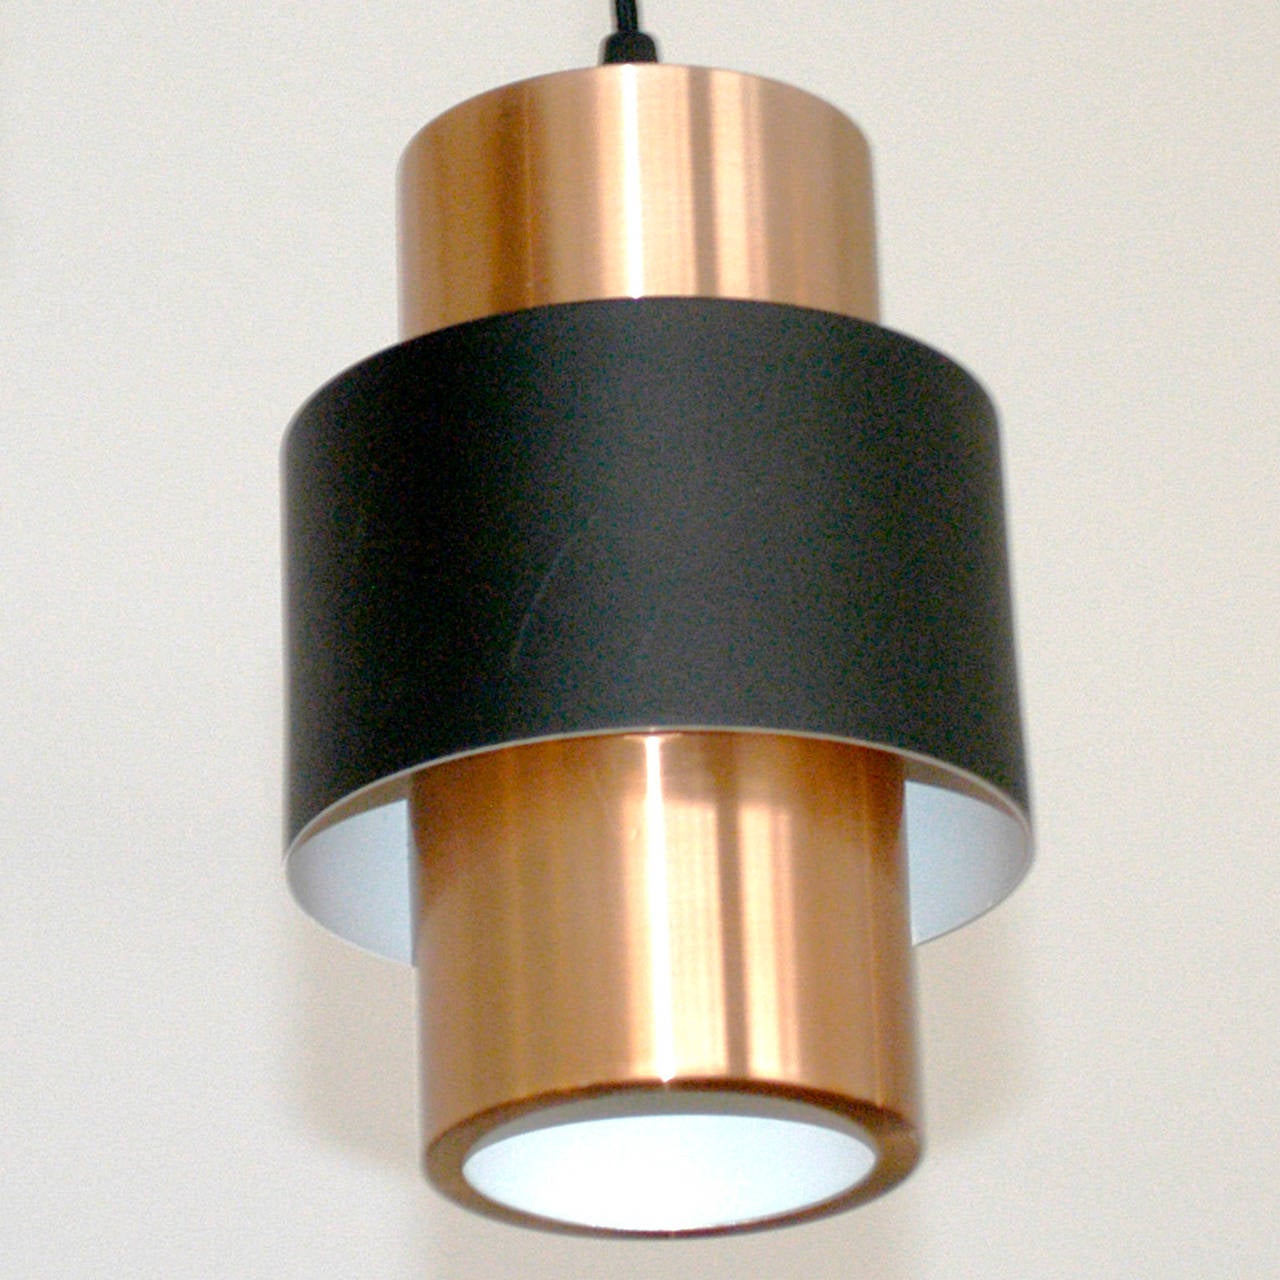 Scandinavian modern pendant lights with copper and black lacquered metal, perfect addition to any modern or Mid-Century Modern interior!
Two pieces available, also as single.